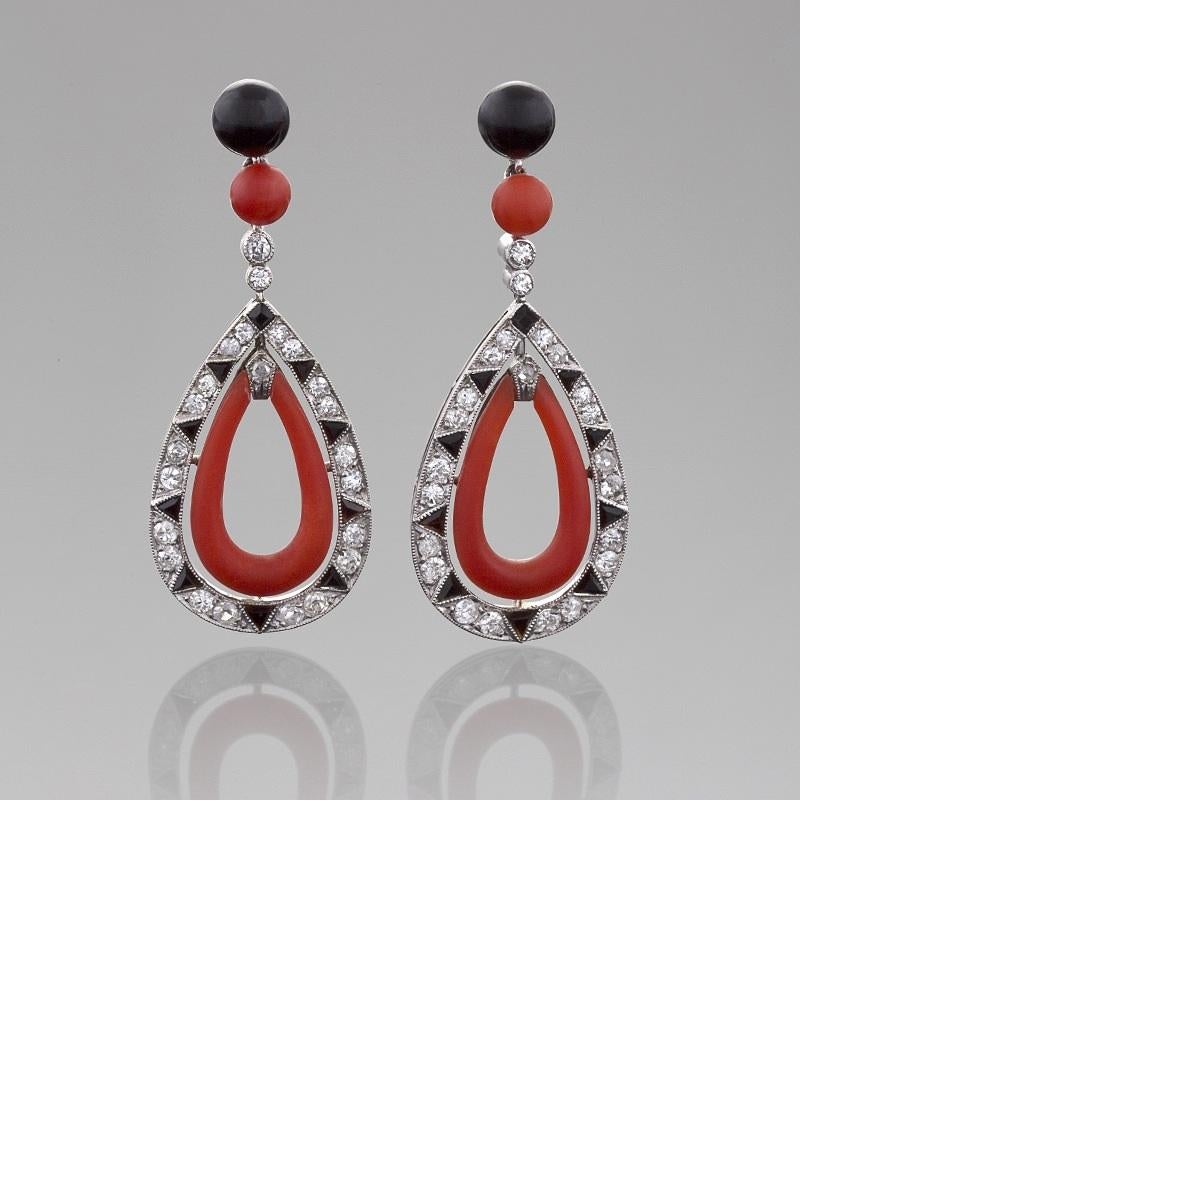 A pair of French Art Deco platinum earrings with diamonds, red coral and onyx. The earring tops have black onyx and coral beads that suspend pear shape drops with 46 old European-cut diamonds with an approximate total weight of 1.00 carat